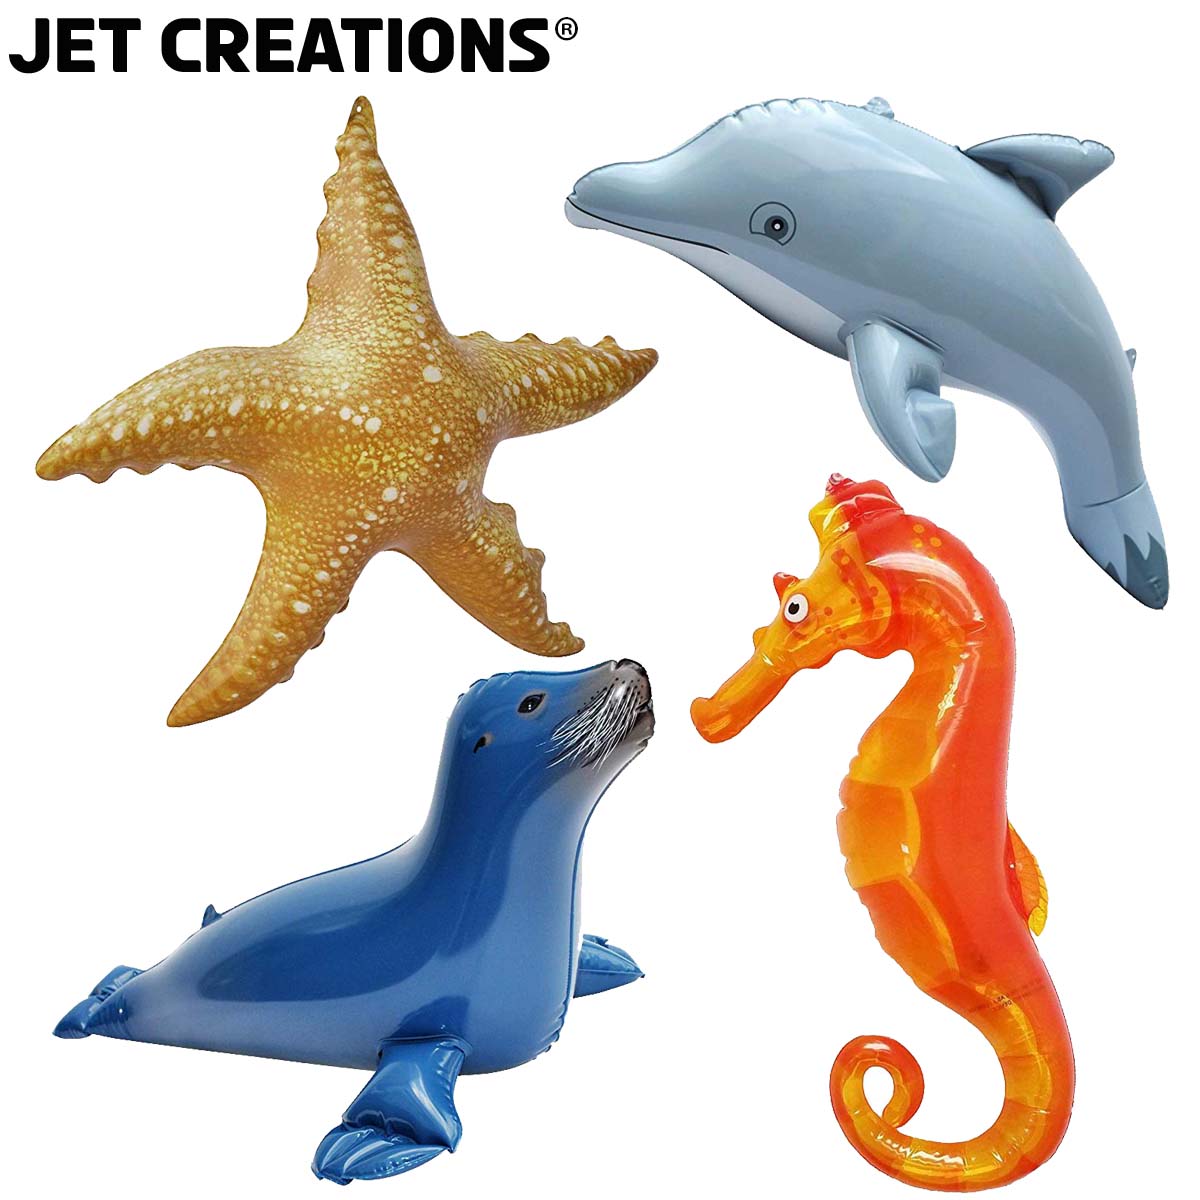 Inflatble Dolphin Seahorse Seal Starfish Air Stuffed Plush Animal Party Favors for Kids Decorations Figures, 4-Count, Size 20 inch, [JC-OCEAN4]